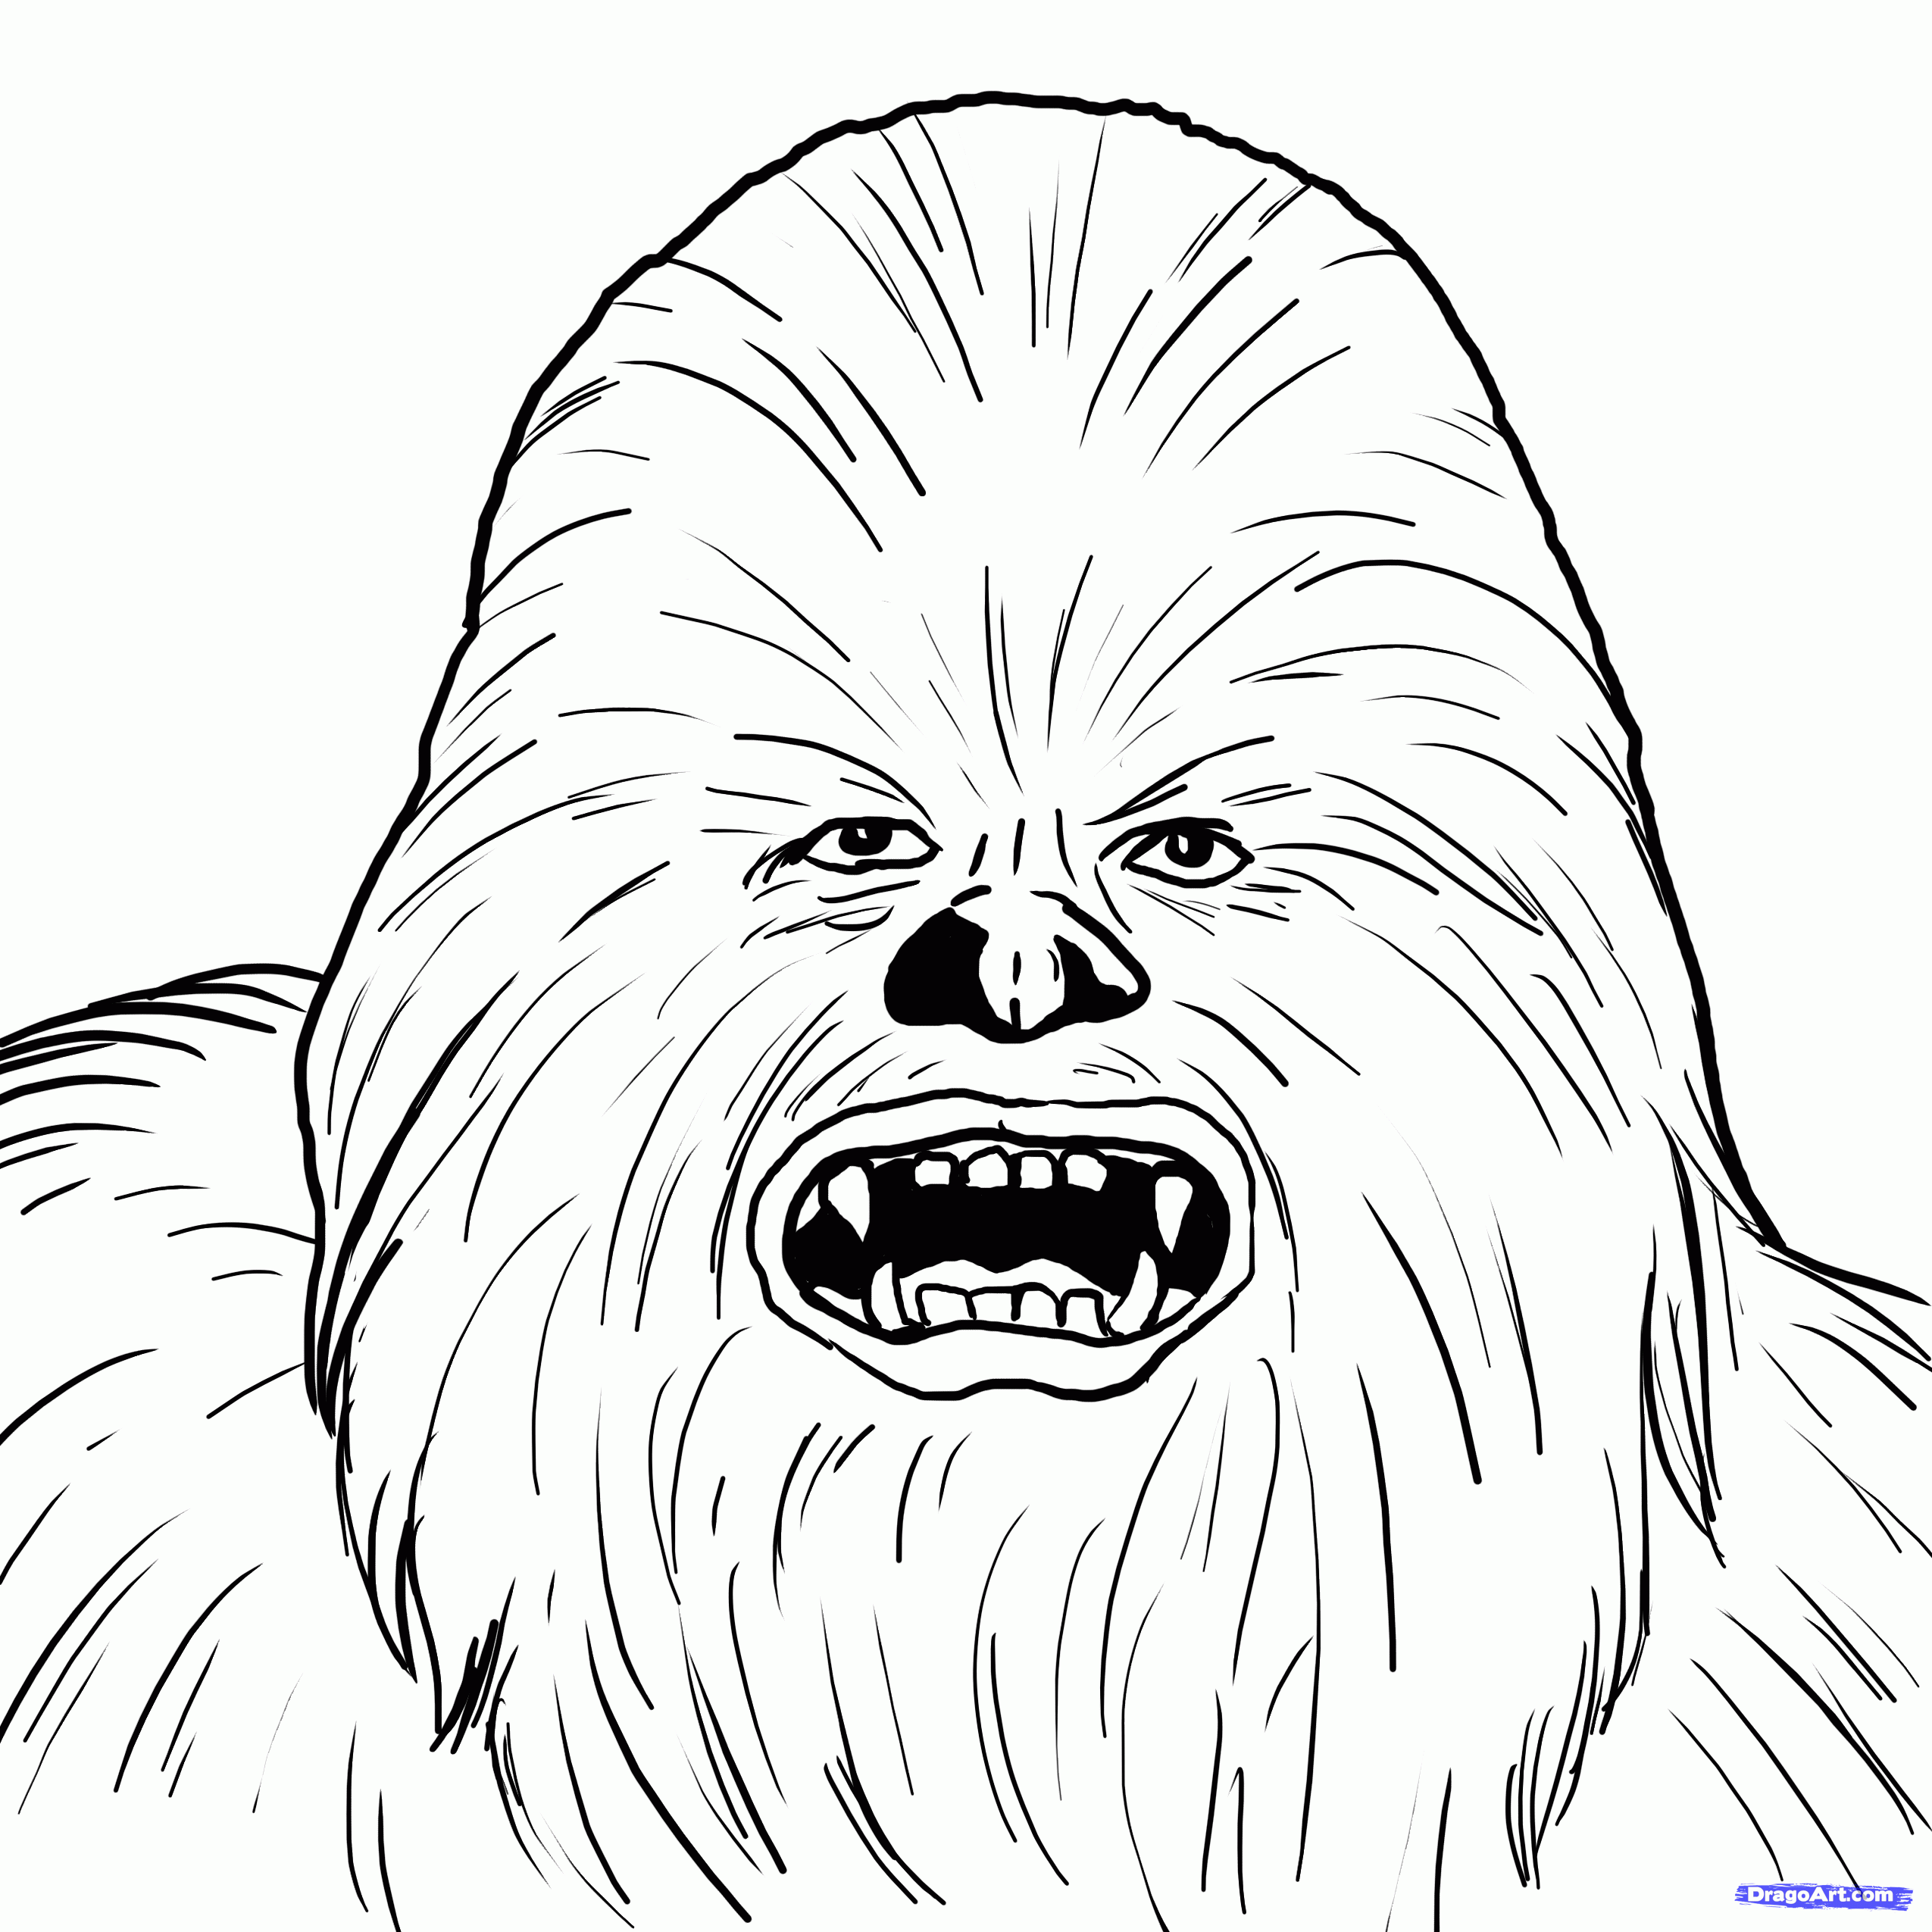 chewbacca-coloring-coloring-pages